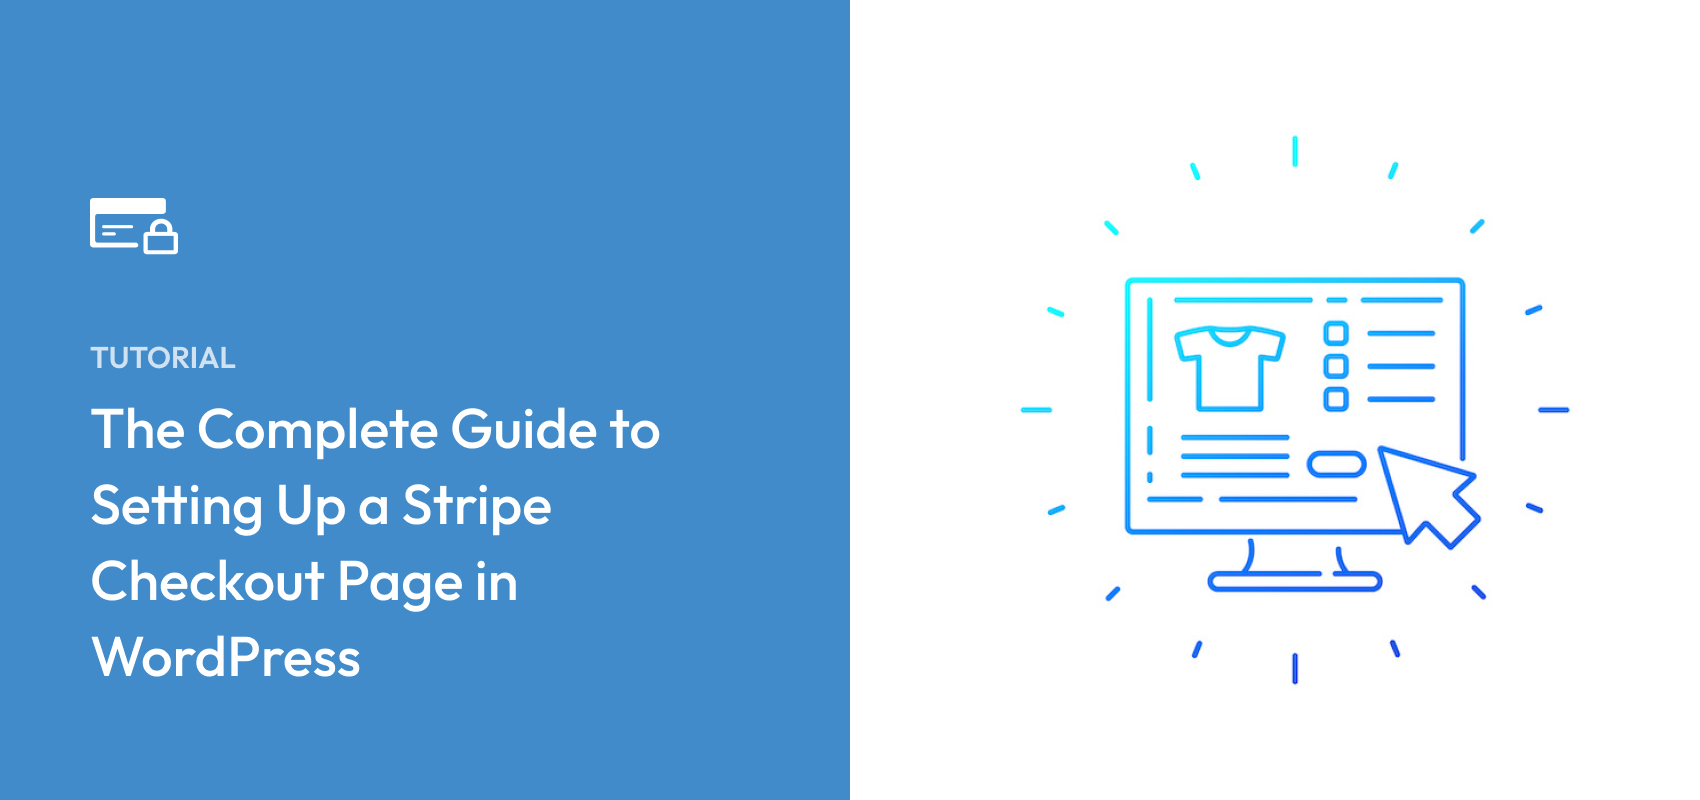 The Complete Guide to Setting Up a Stripe Checkout Page in WordPress